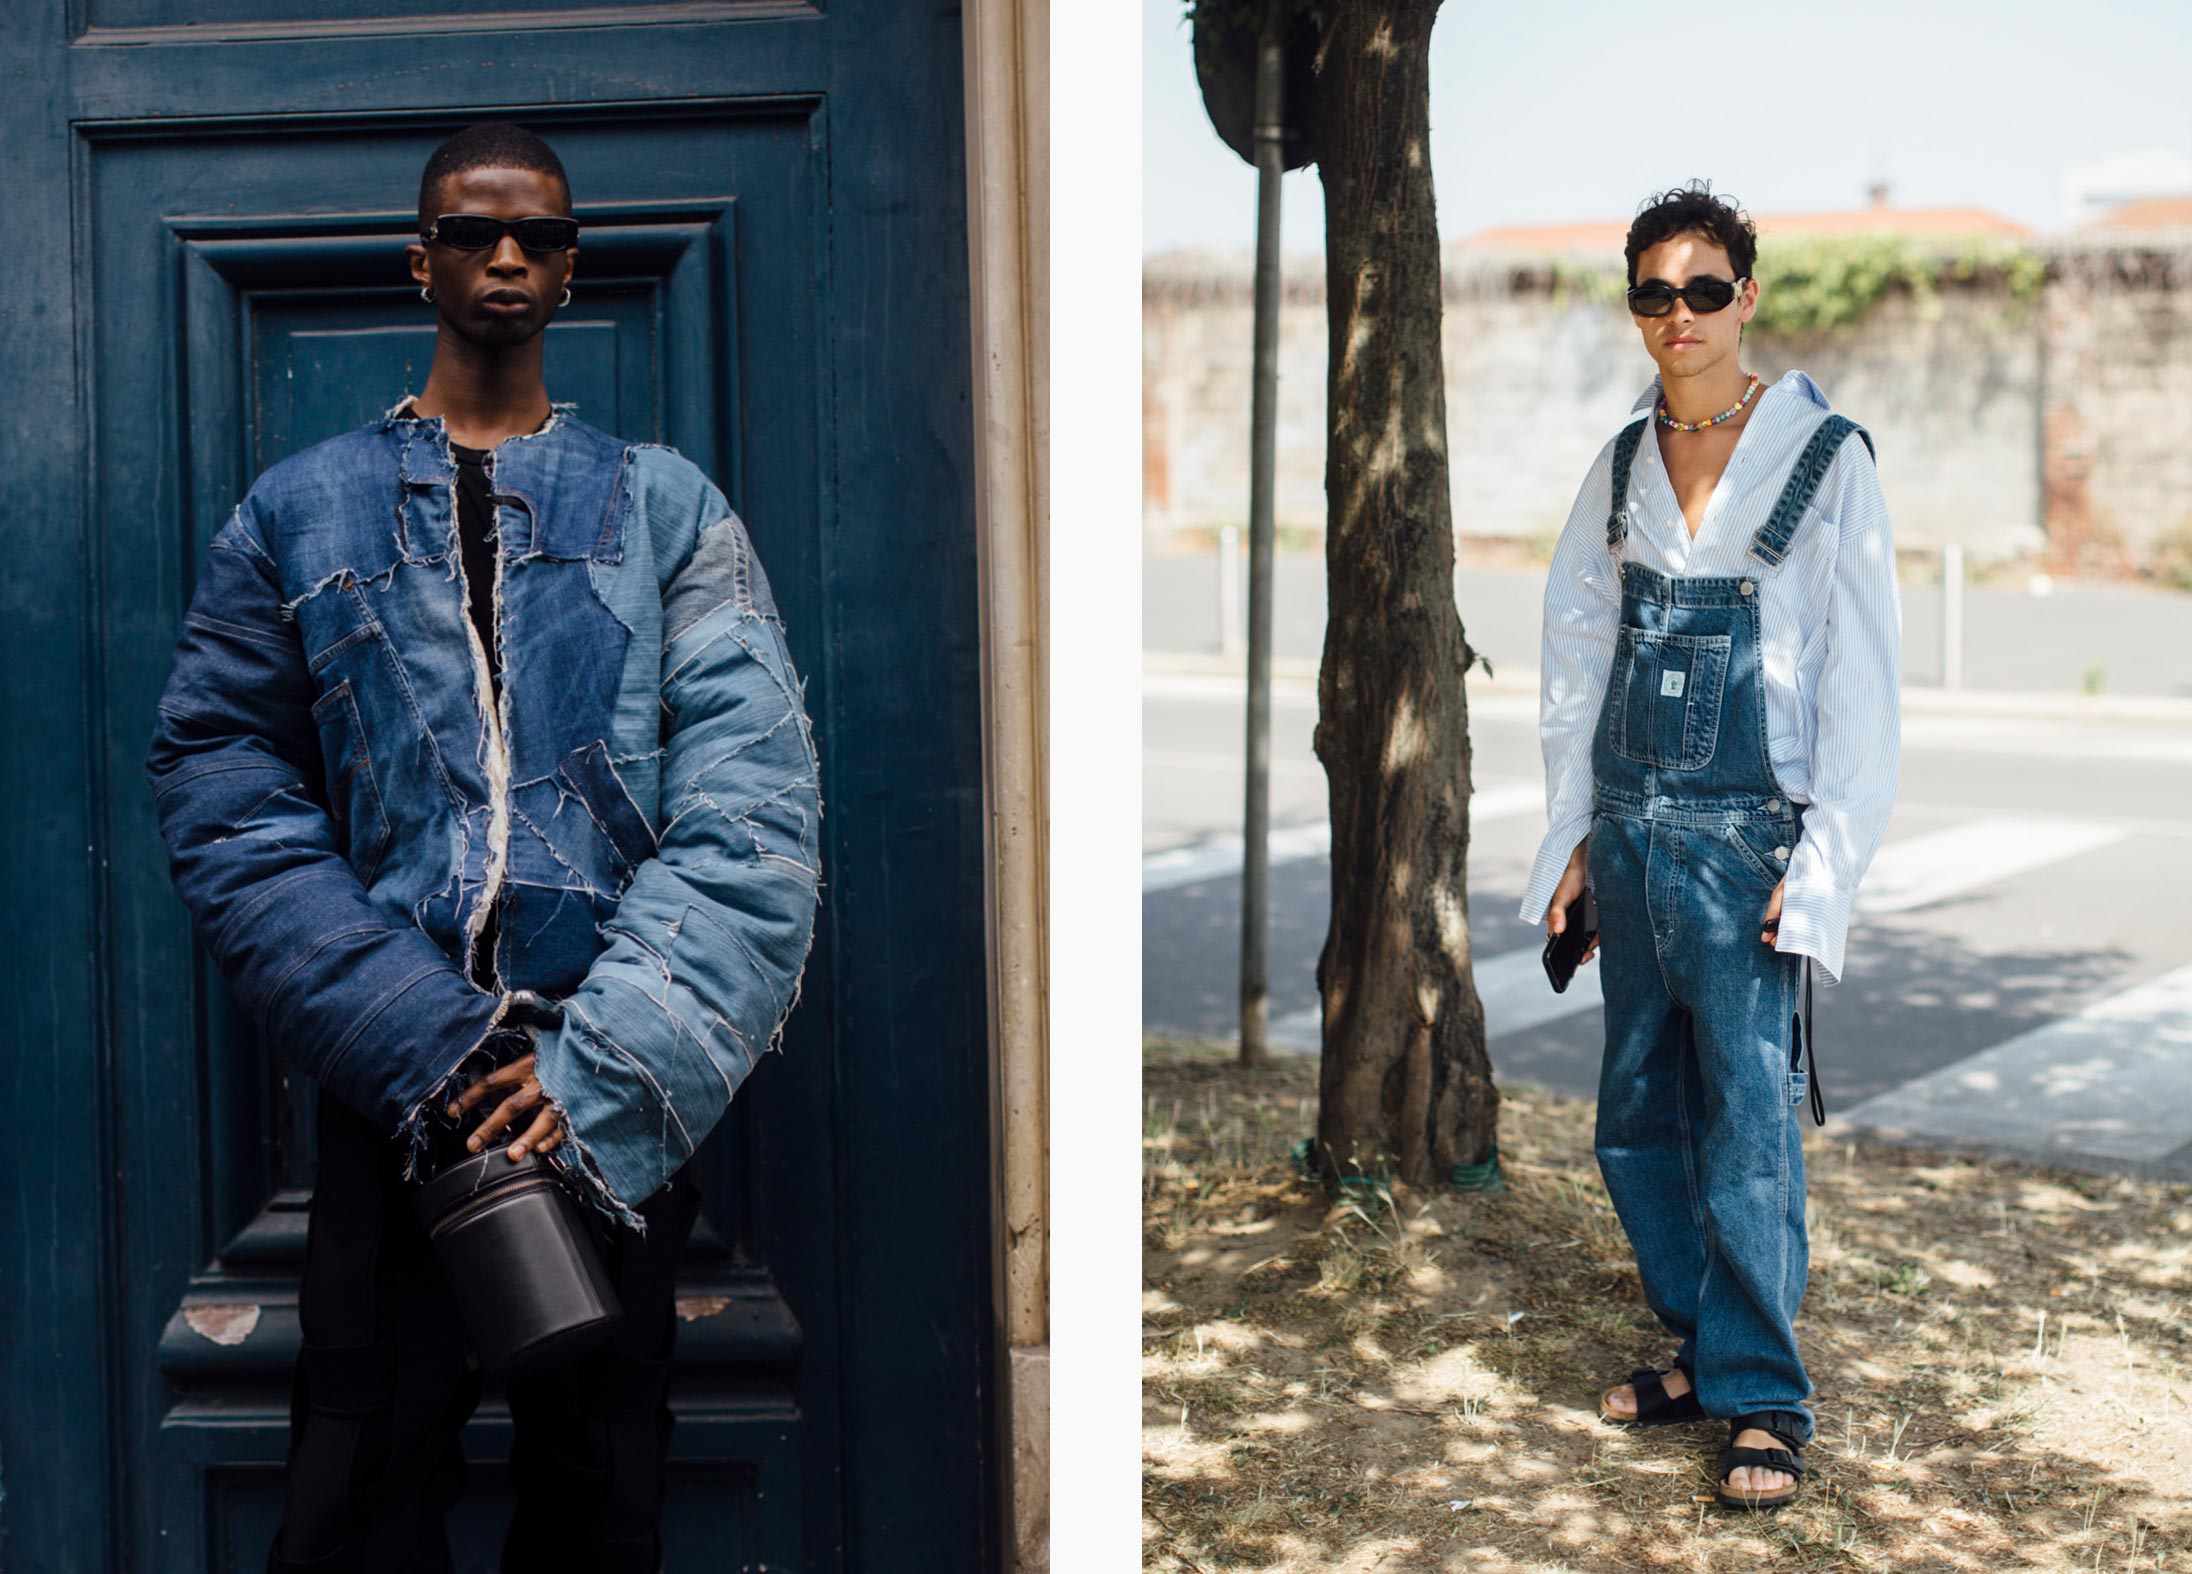 Men wearing clothes that fit the denim trend